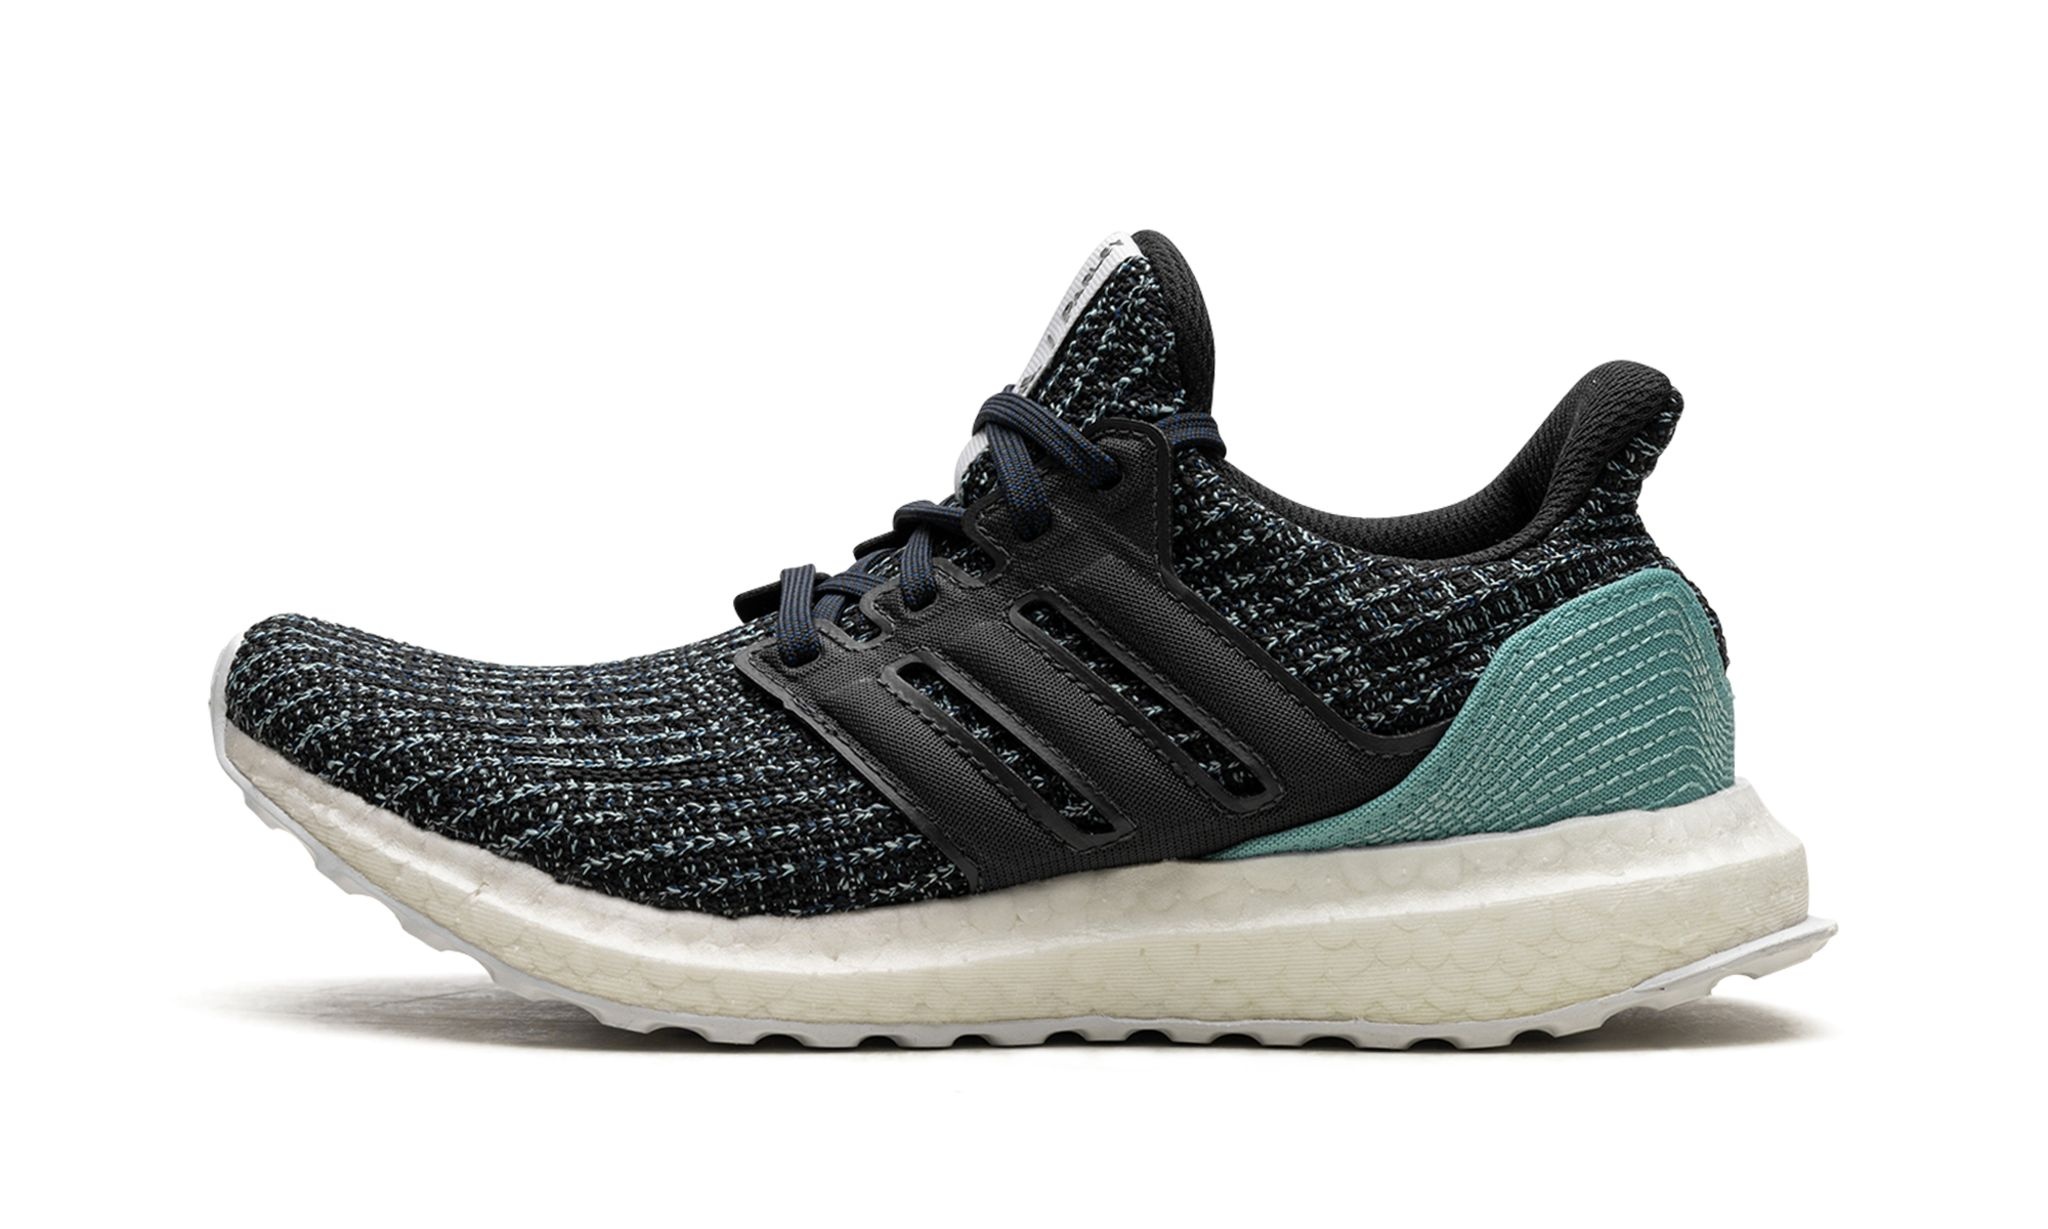 Parley x UltraBoost 4.0 "Carbon" - 1